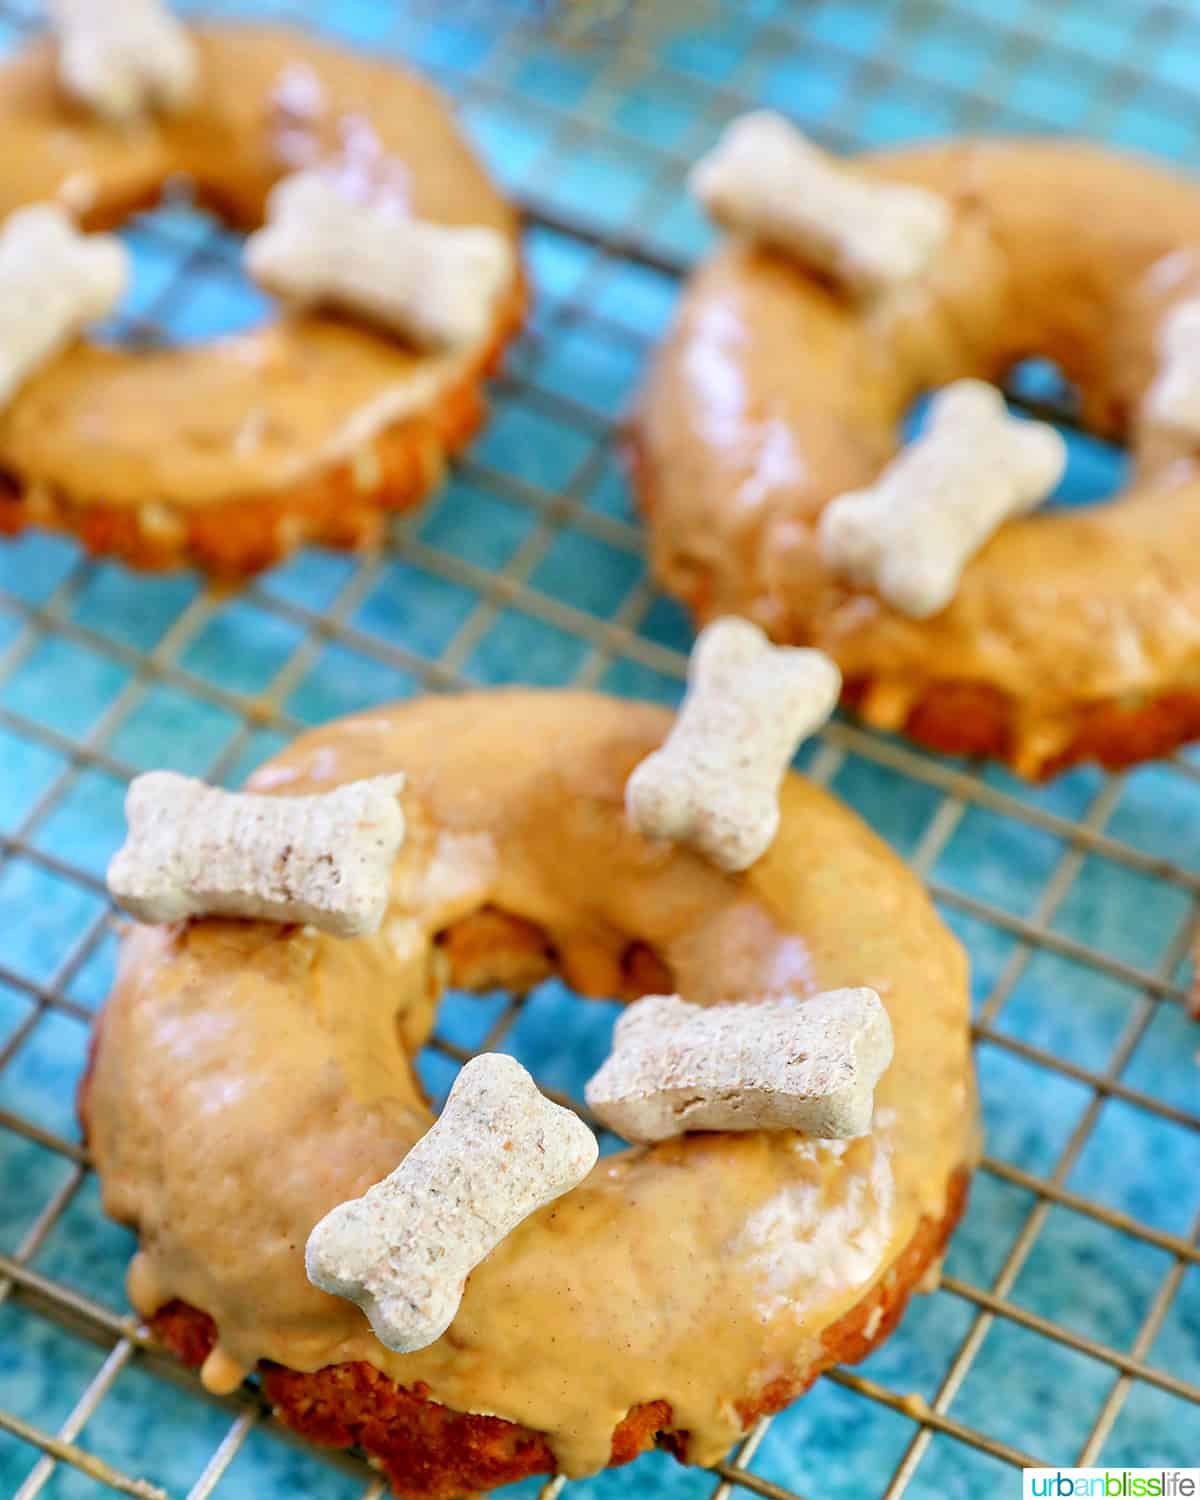 three glazed dog donuts with dog biscuits on a cooling rack.